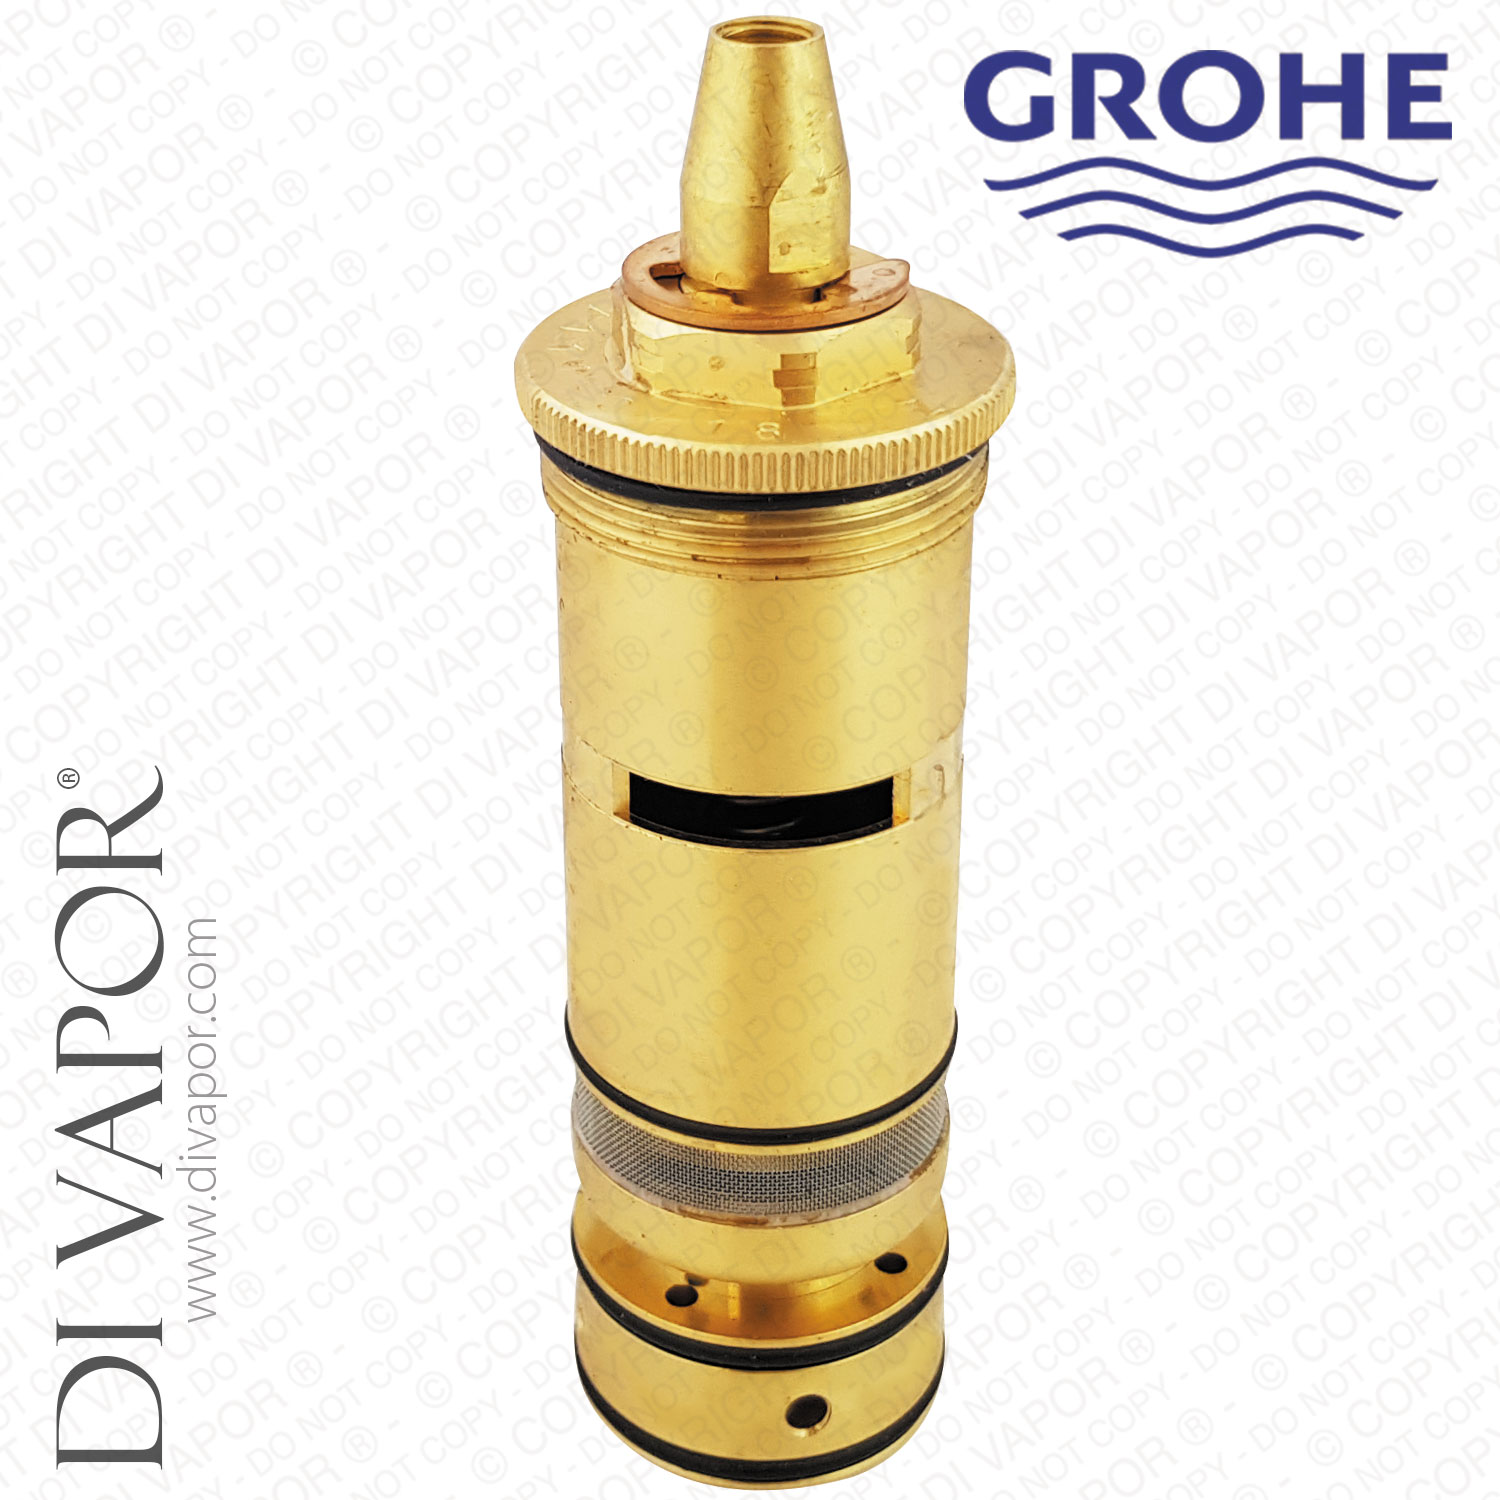 GROHE Grohe Grohmix 1/2" thermostatic cartridge 47111 000 